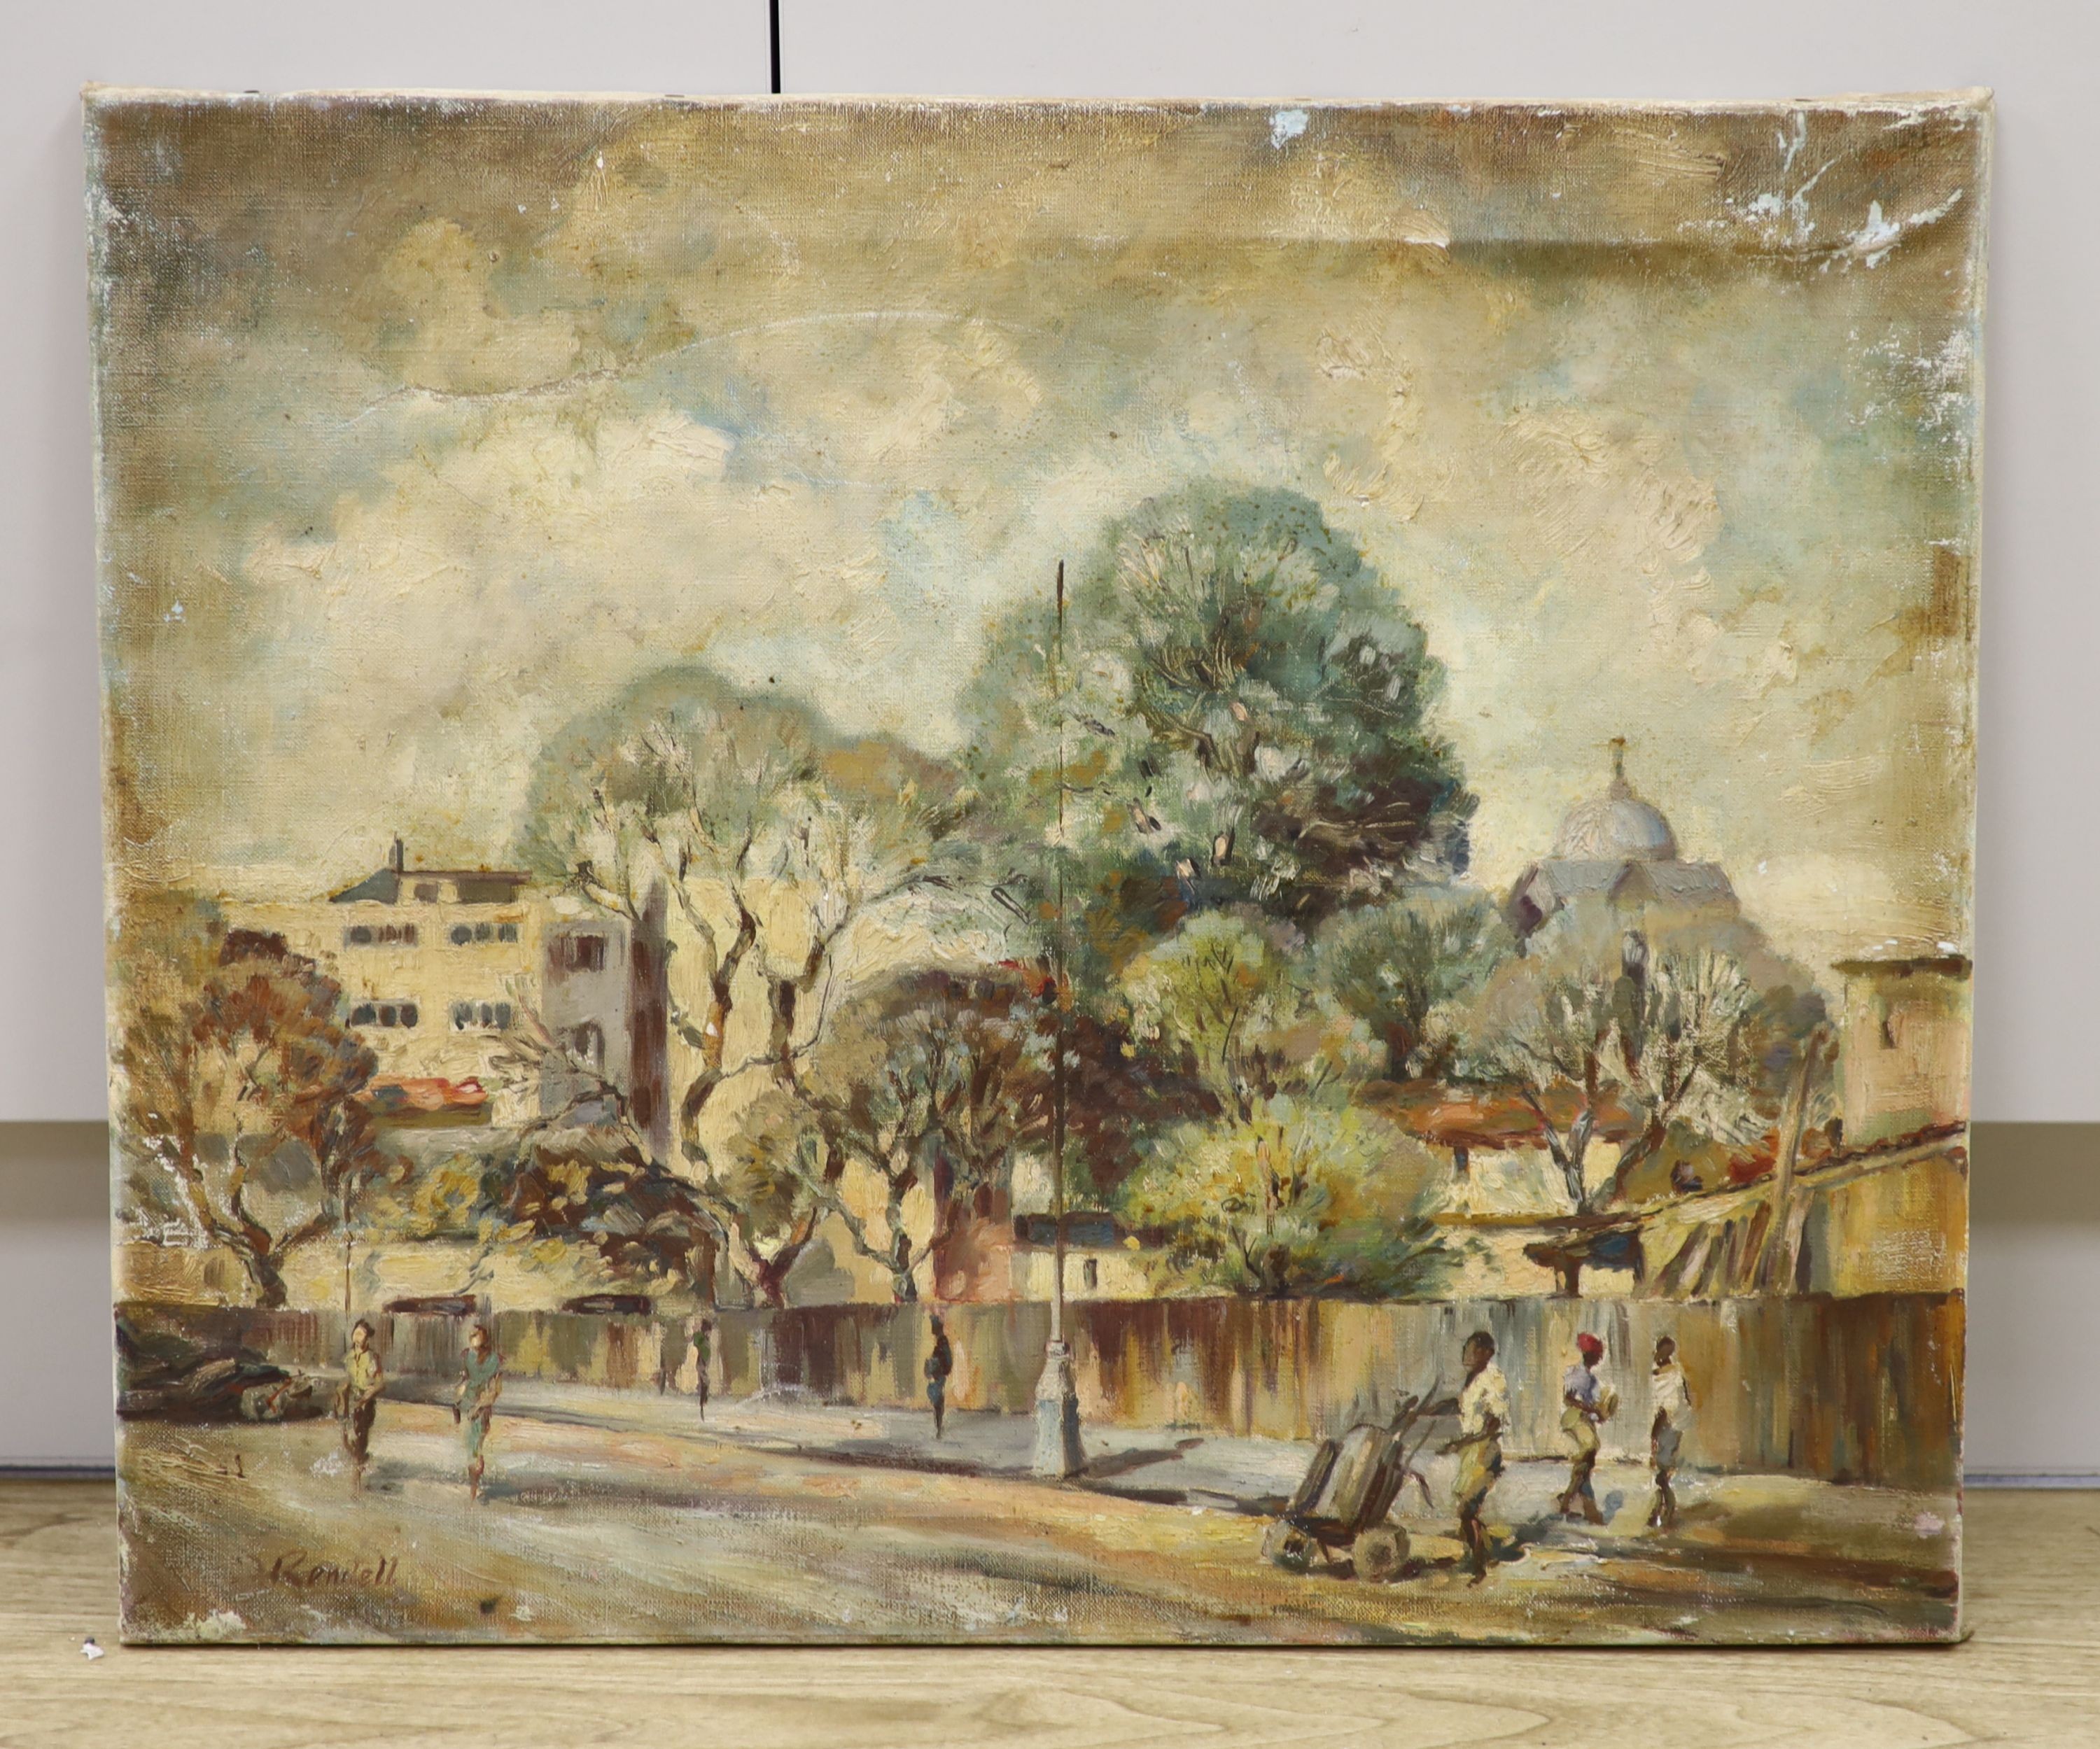 J. Rendell, oil on canvas, 'Behind Meikles Hotel, Manica Road, Rhodesia', signed and inscribed verso, 51 x 61cm, unframed